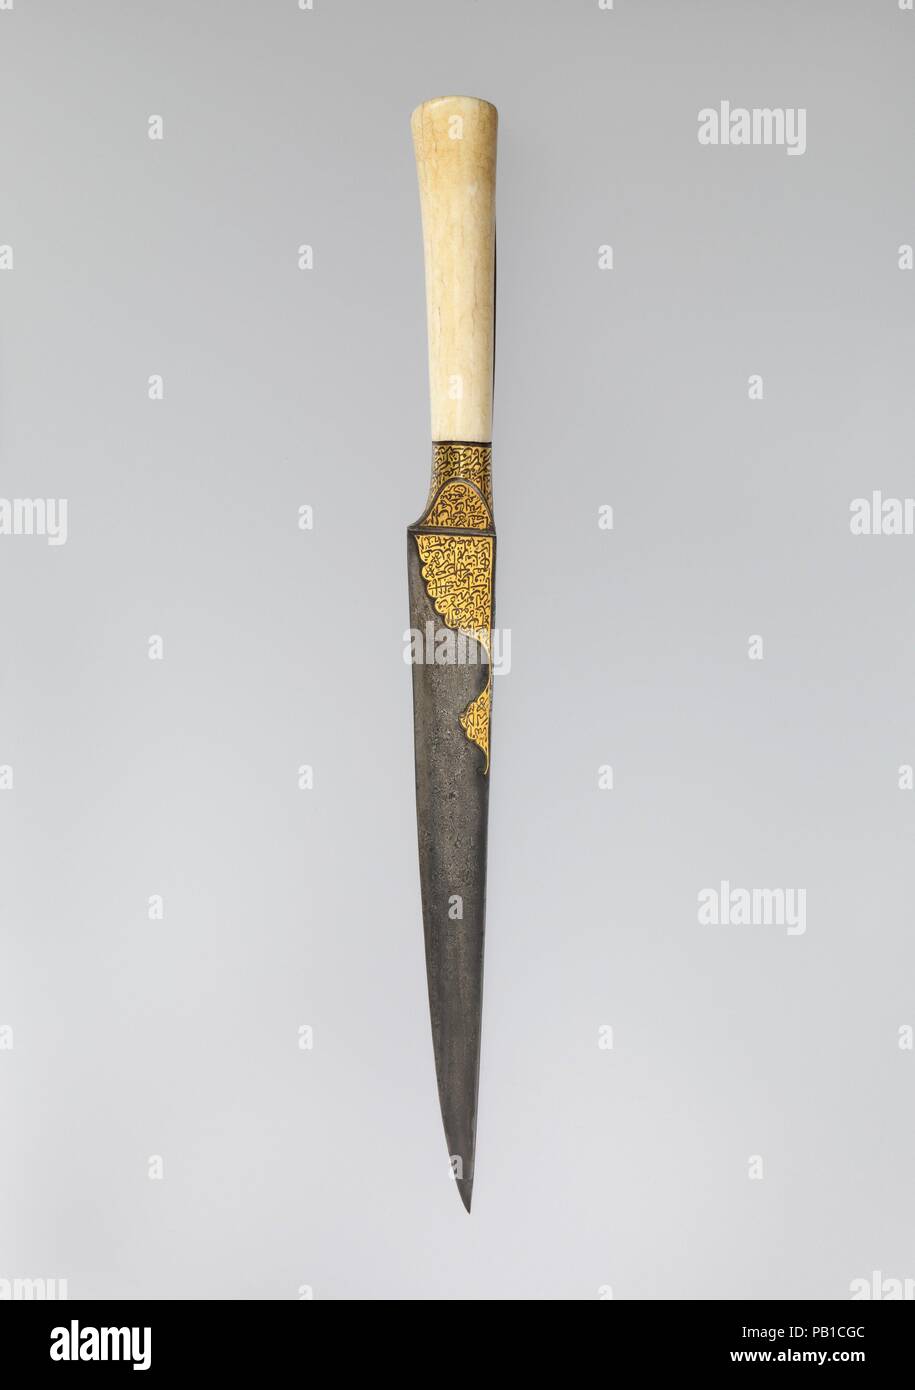 Knife with an Ivory Handle and Qur'anic Inscriptions. Dimensions: L. 14 1/16 in. (35.7 cm)  W. 1 1/4 in. (3.2 cm). Date: early 19th century.  This dagger has been inscribed with Qur'anic passages on the forte of the blade, as well as on the ivory handle. The inclusion of holy words on this object imbues it with talismanic properties, believed to offer protection and ward off evil. The most efficacious talismanic objects are those that are inscribed with prayers that evoke the name of God, the Prophet Muhammad and his companions.  'Damascus' or 'Watered' steel refers to blades like this one tha Stock Photo